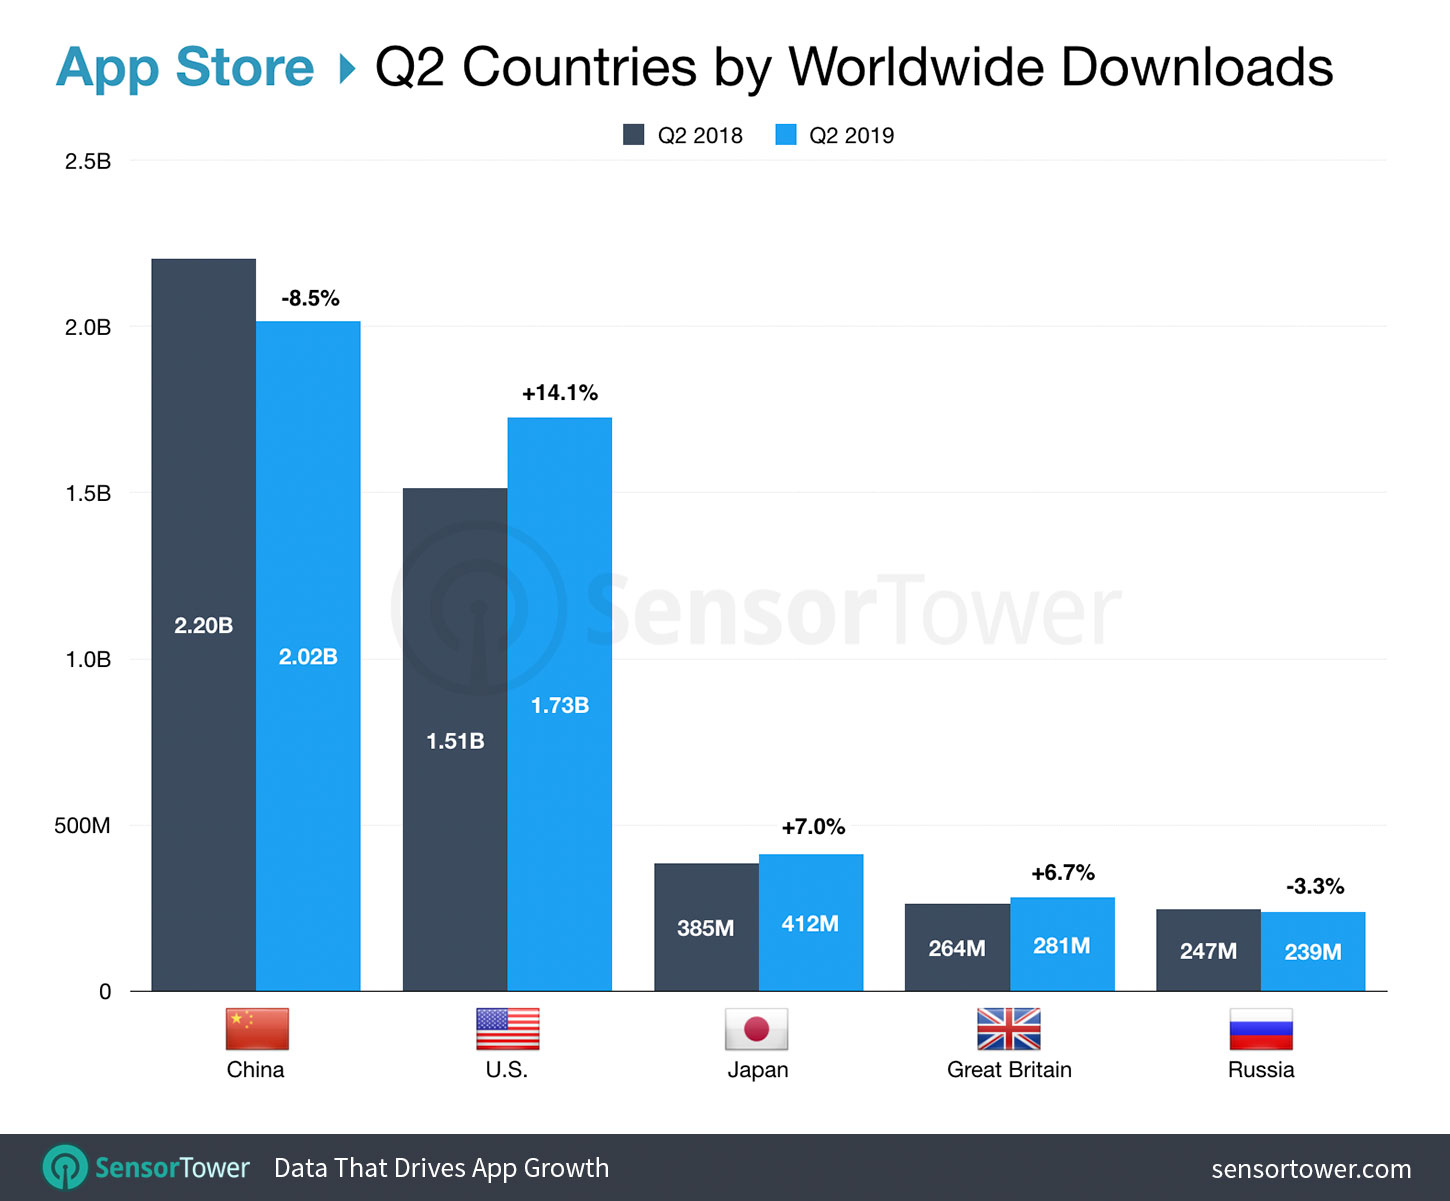 Top Countries by App Store Downloads for Q2 2019